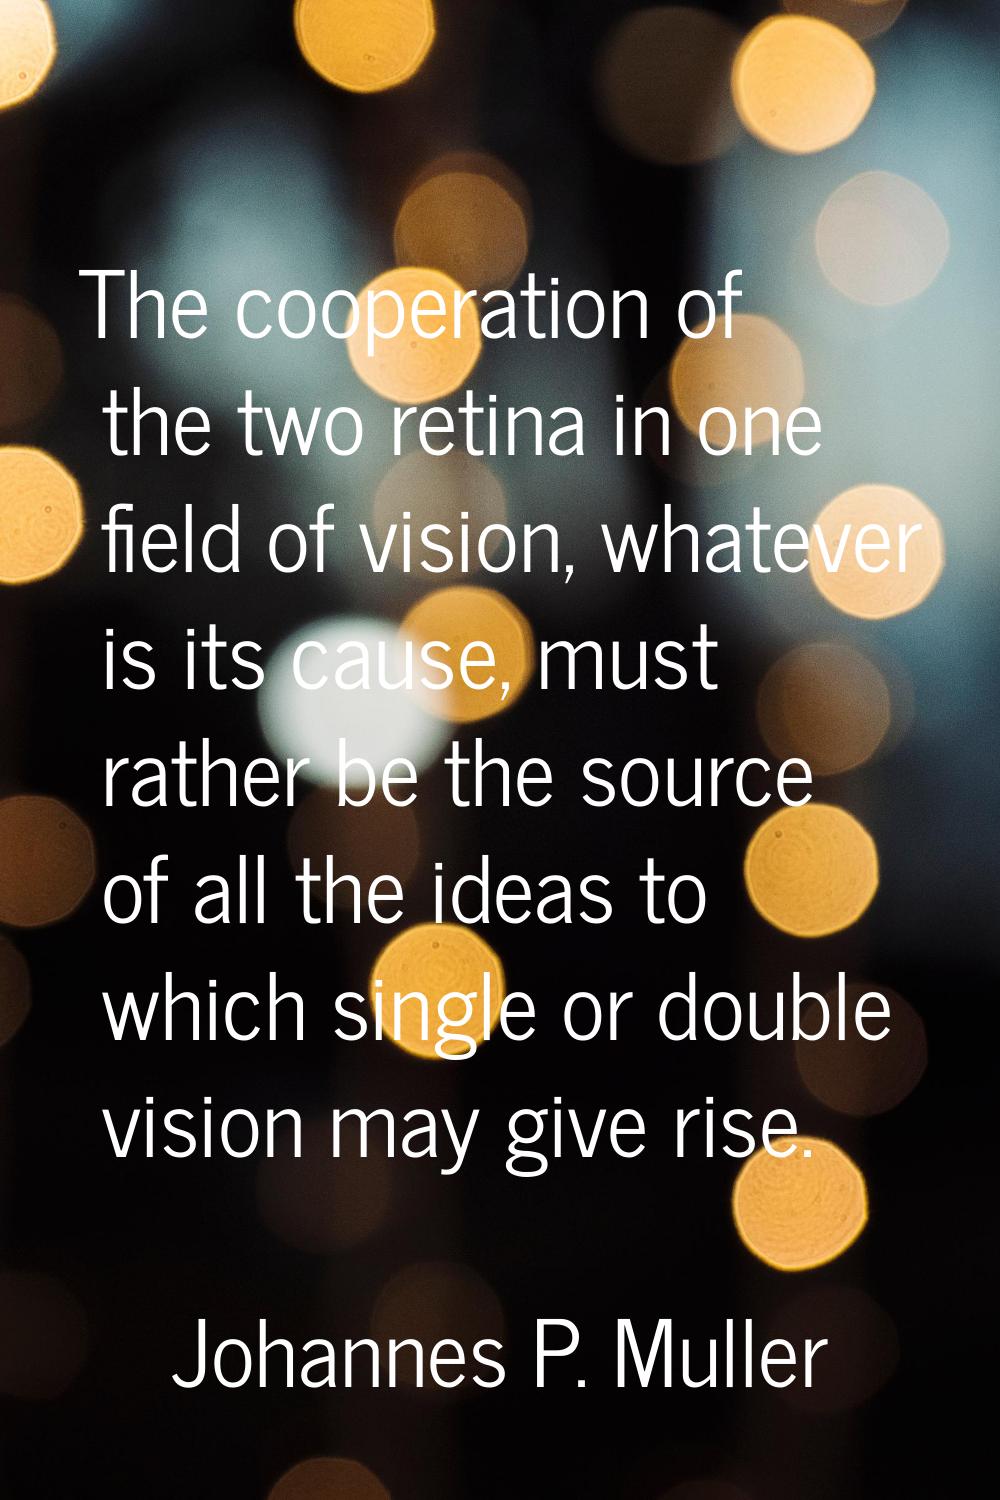 The cooperation of the two retina in one field of vision, whatever is its cause, must rather be the